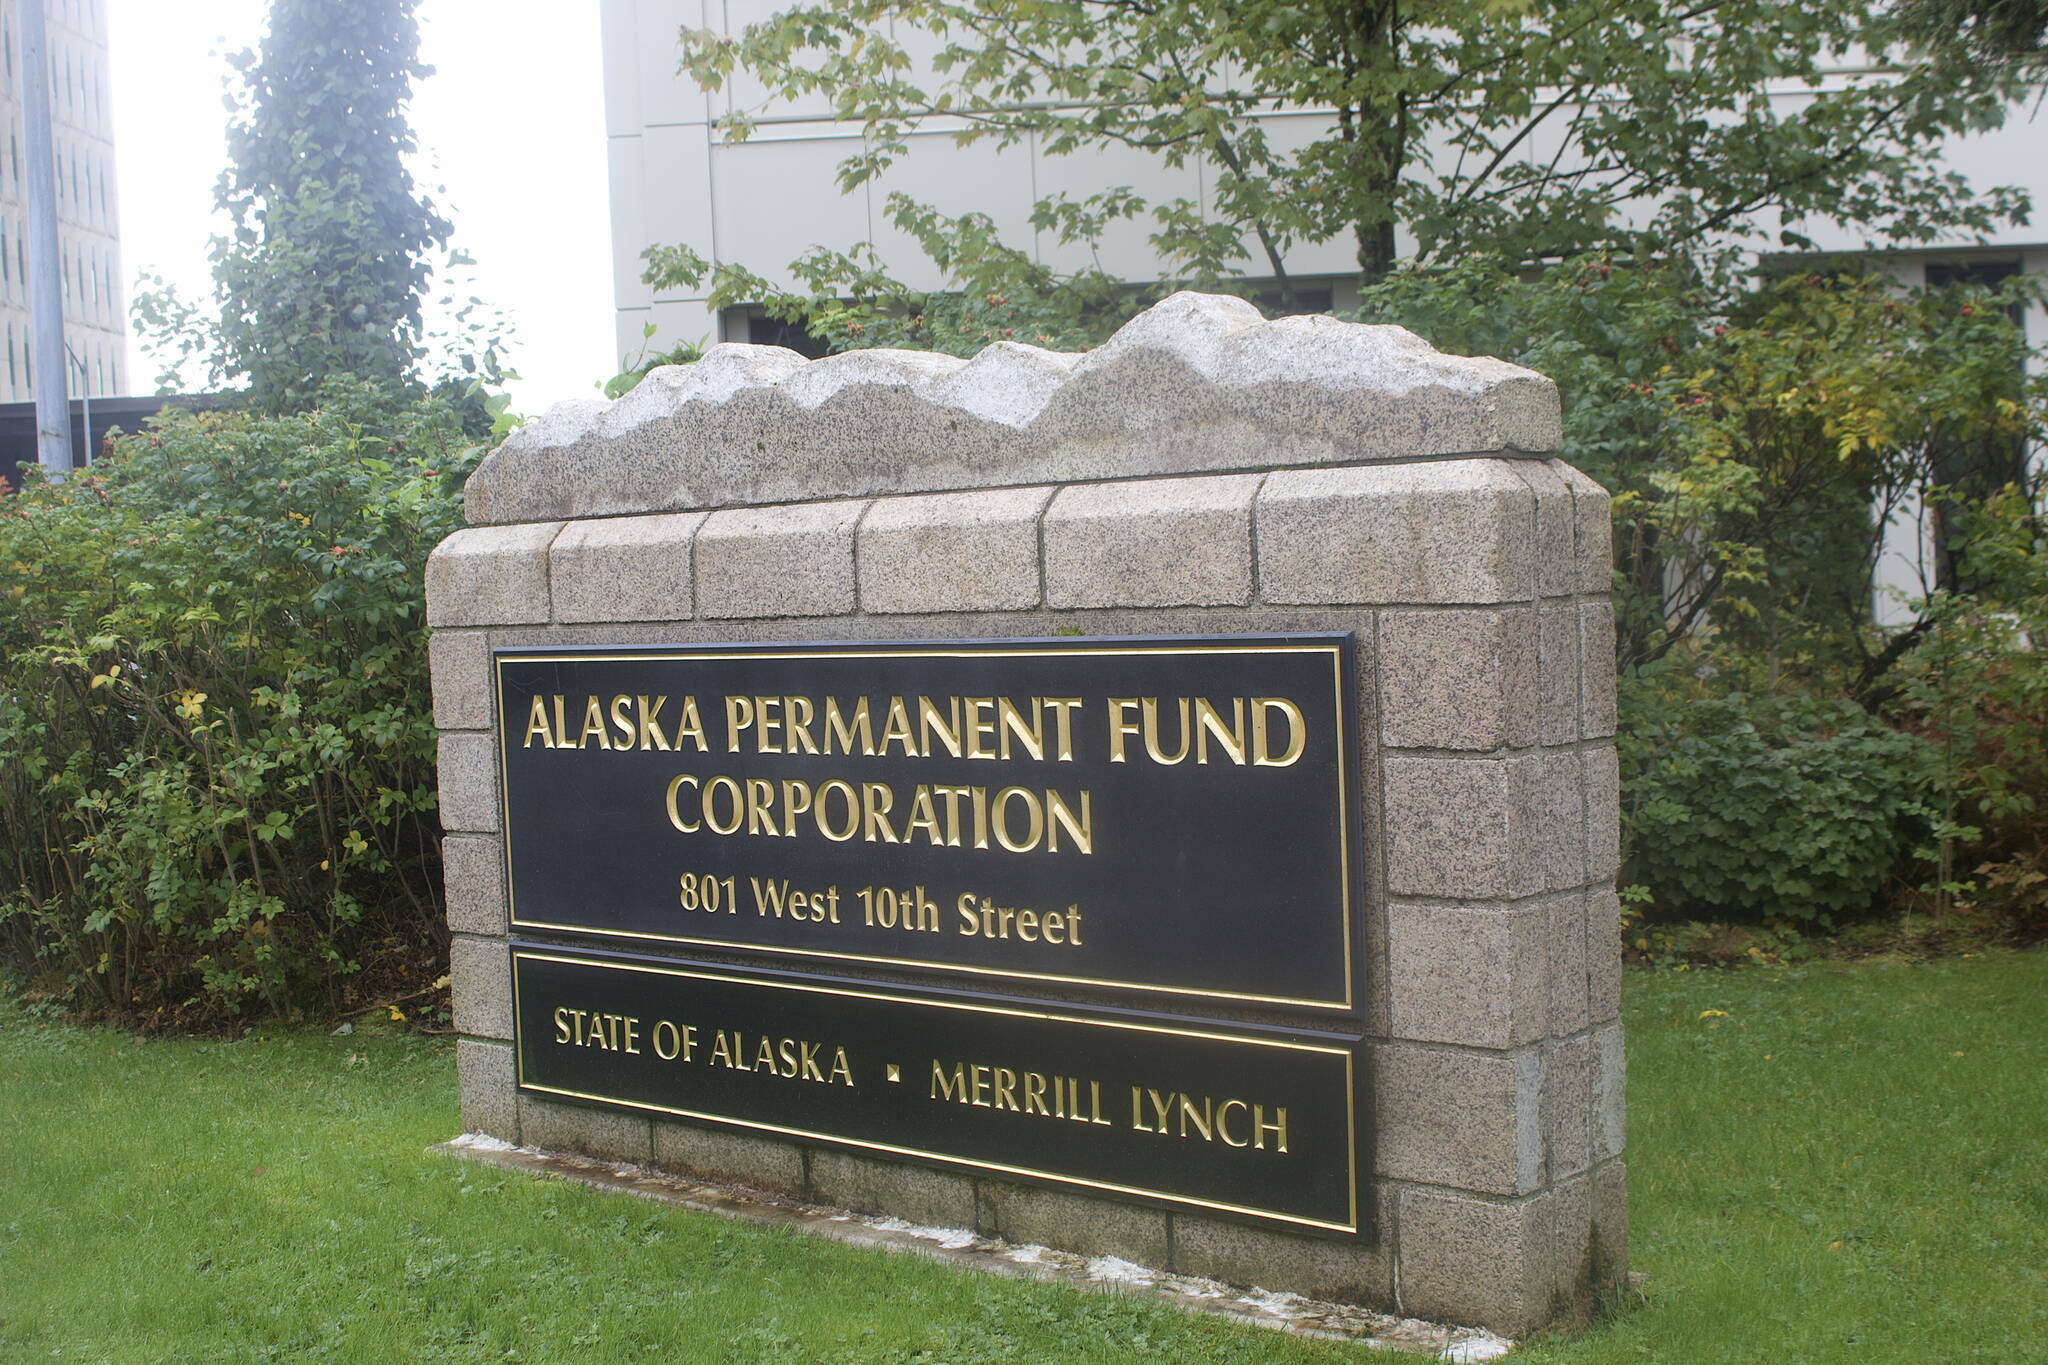 The Alaska Permanent Fund Corp. building in Juneau, seen here Sept. 28, 2022, is where most the corporation’s estimated 70 employees work. APFC leaders are considering options to move some operations and staff to Anchorage during the next year. (Mark Sabbatini / Juneau Empire File)